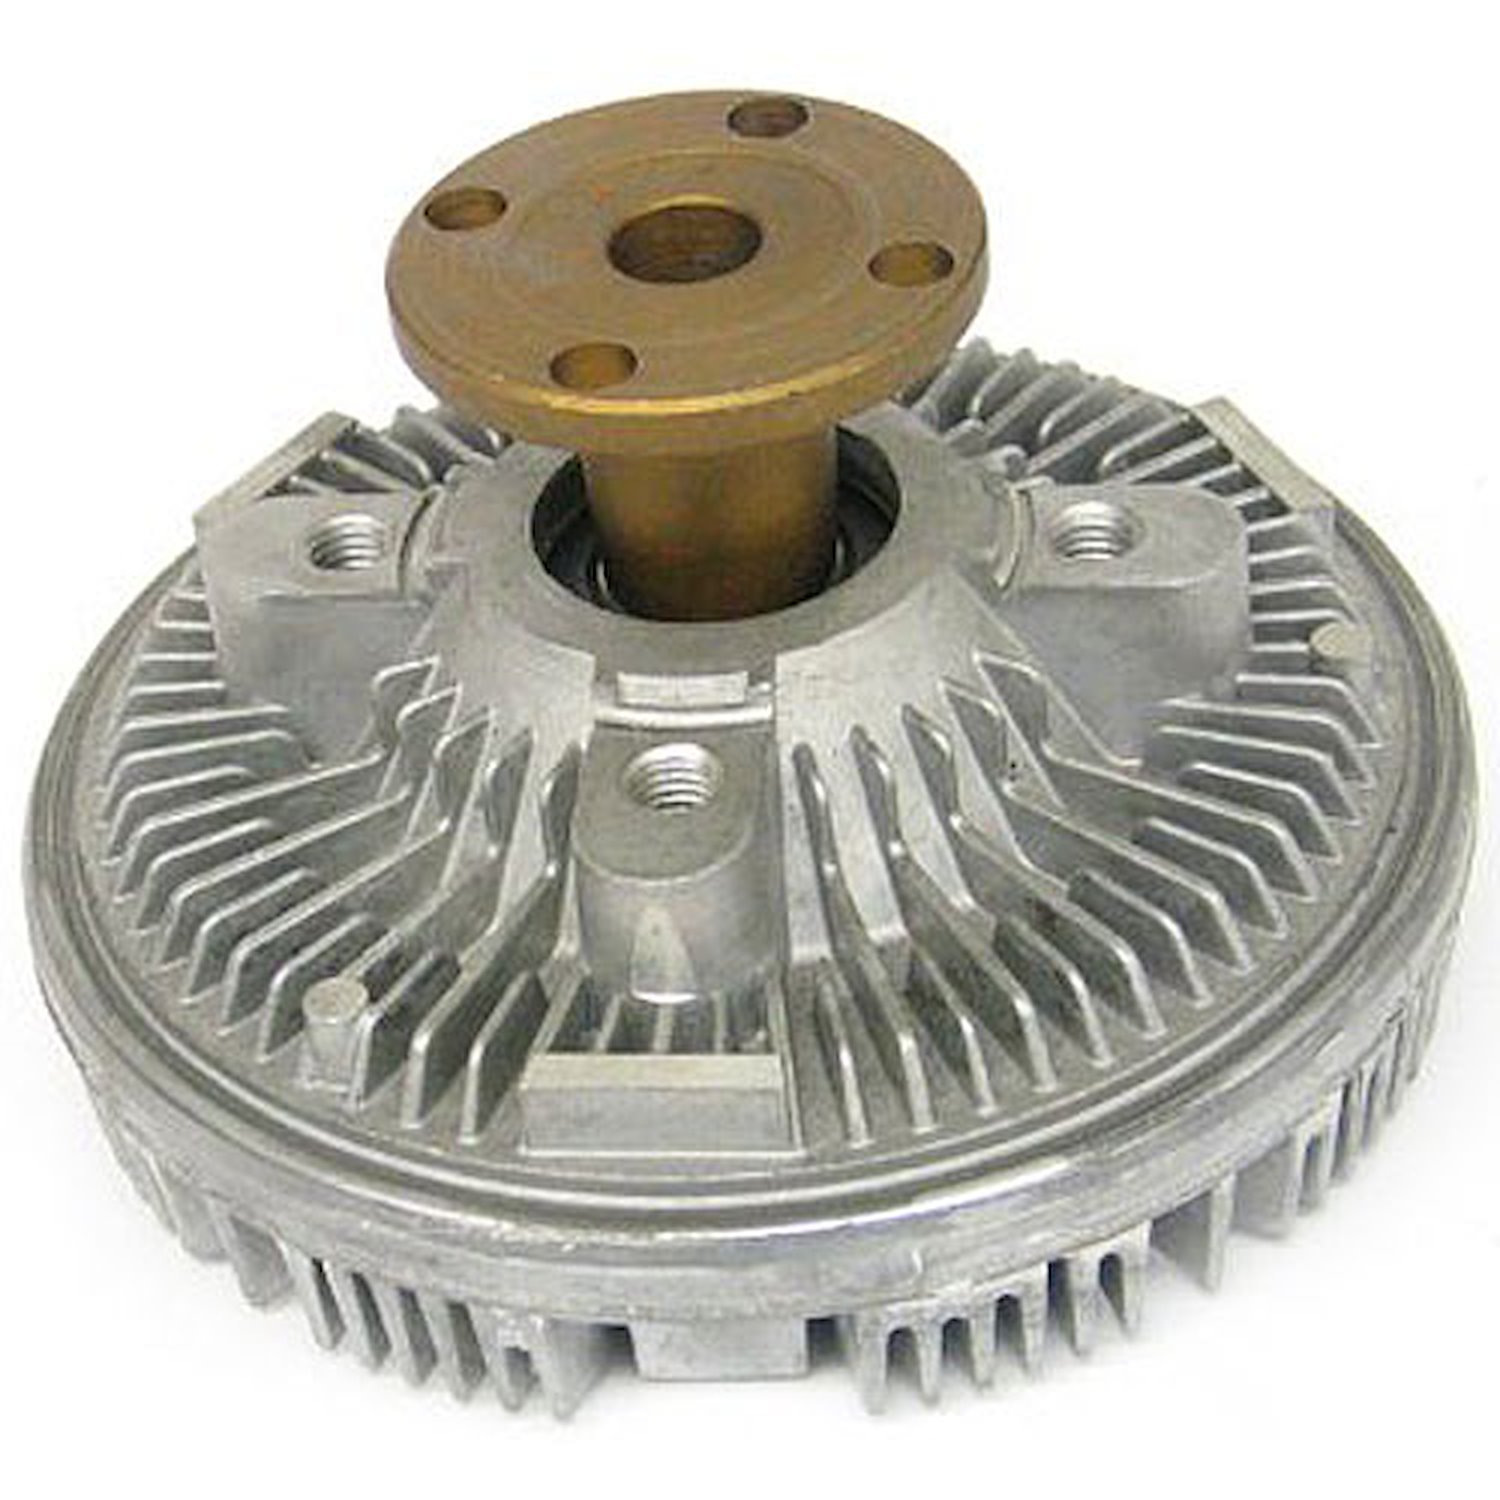 Heavy Duty Thermal Fan Clutch for 1987-1999 Chevy/GMC/Buick/Oldsmobile with Chevy Small Block, Big Block, & 4.3L V6